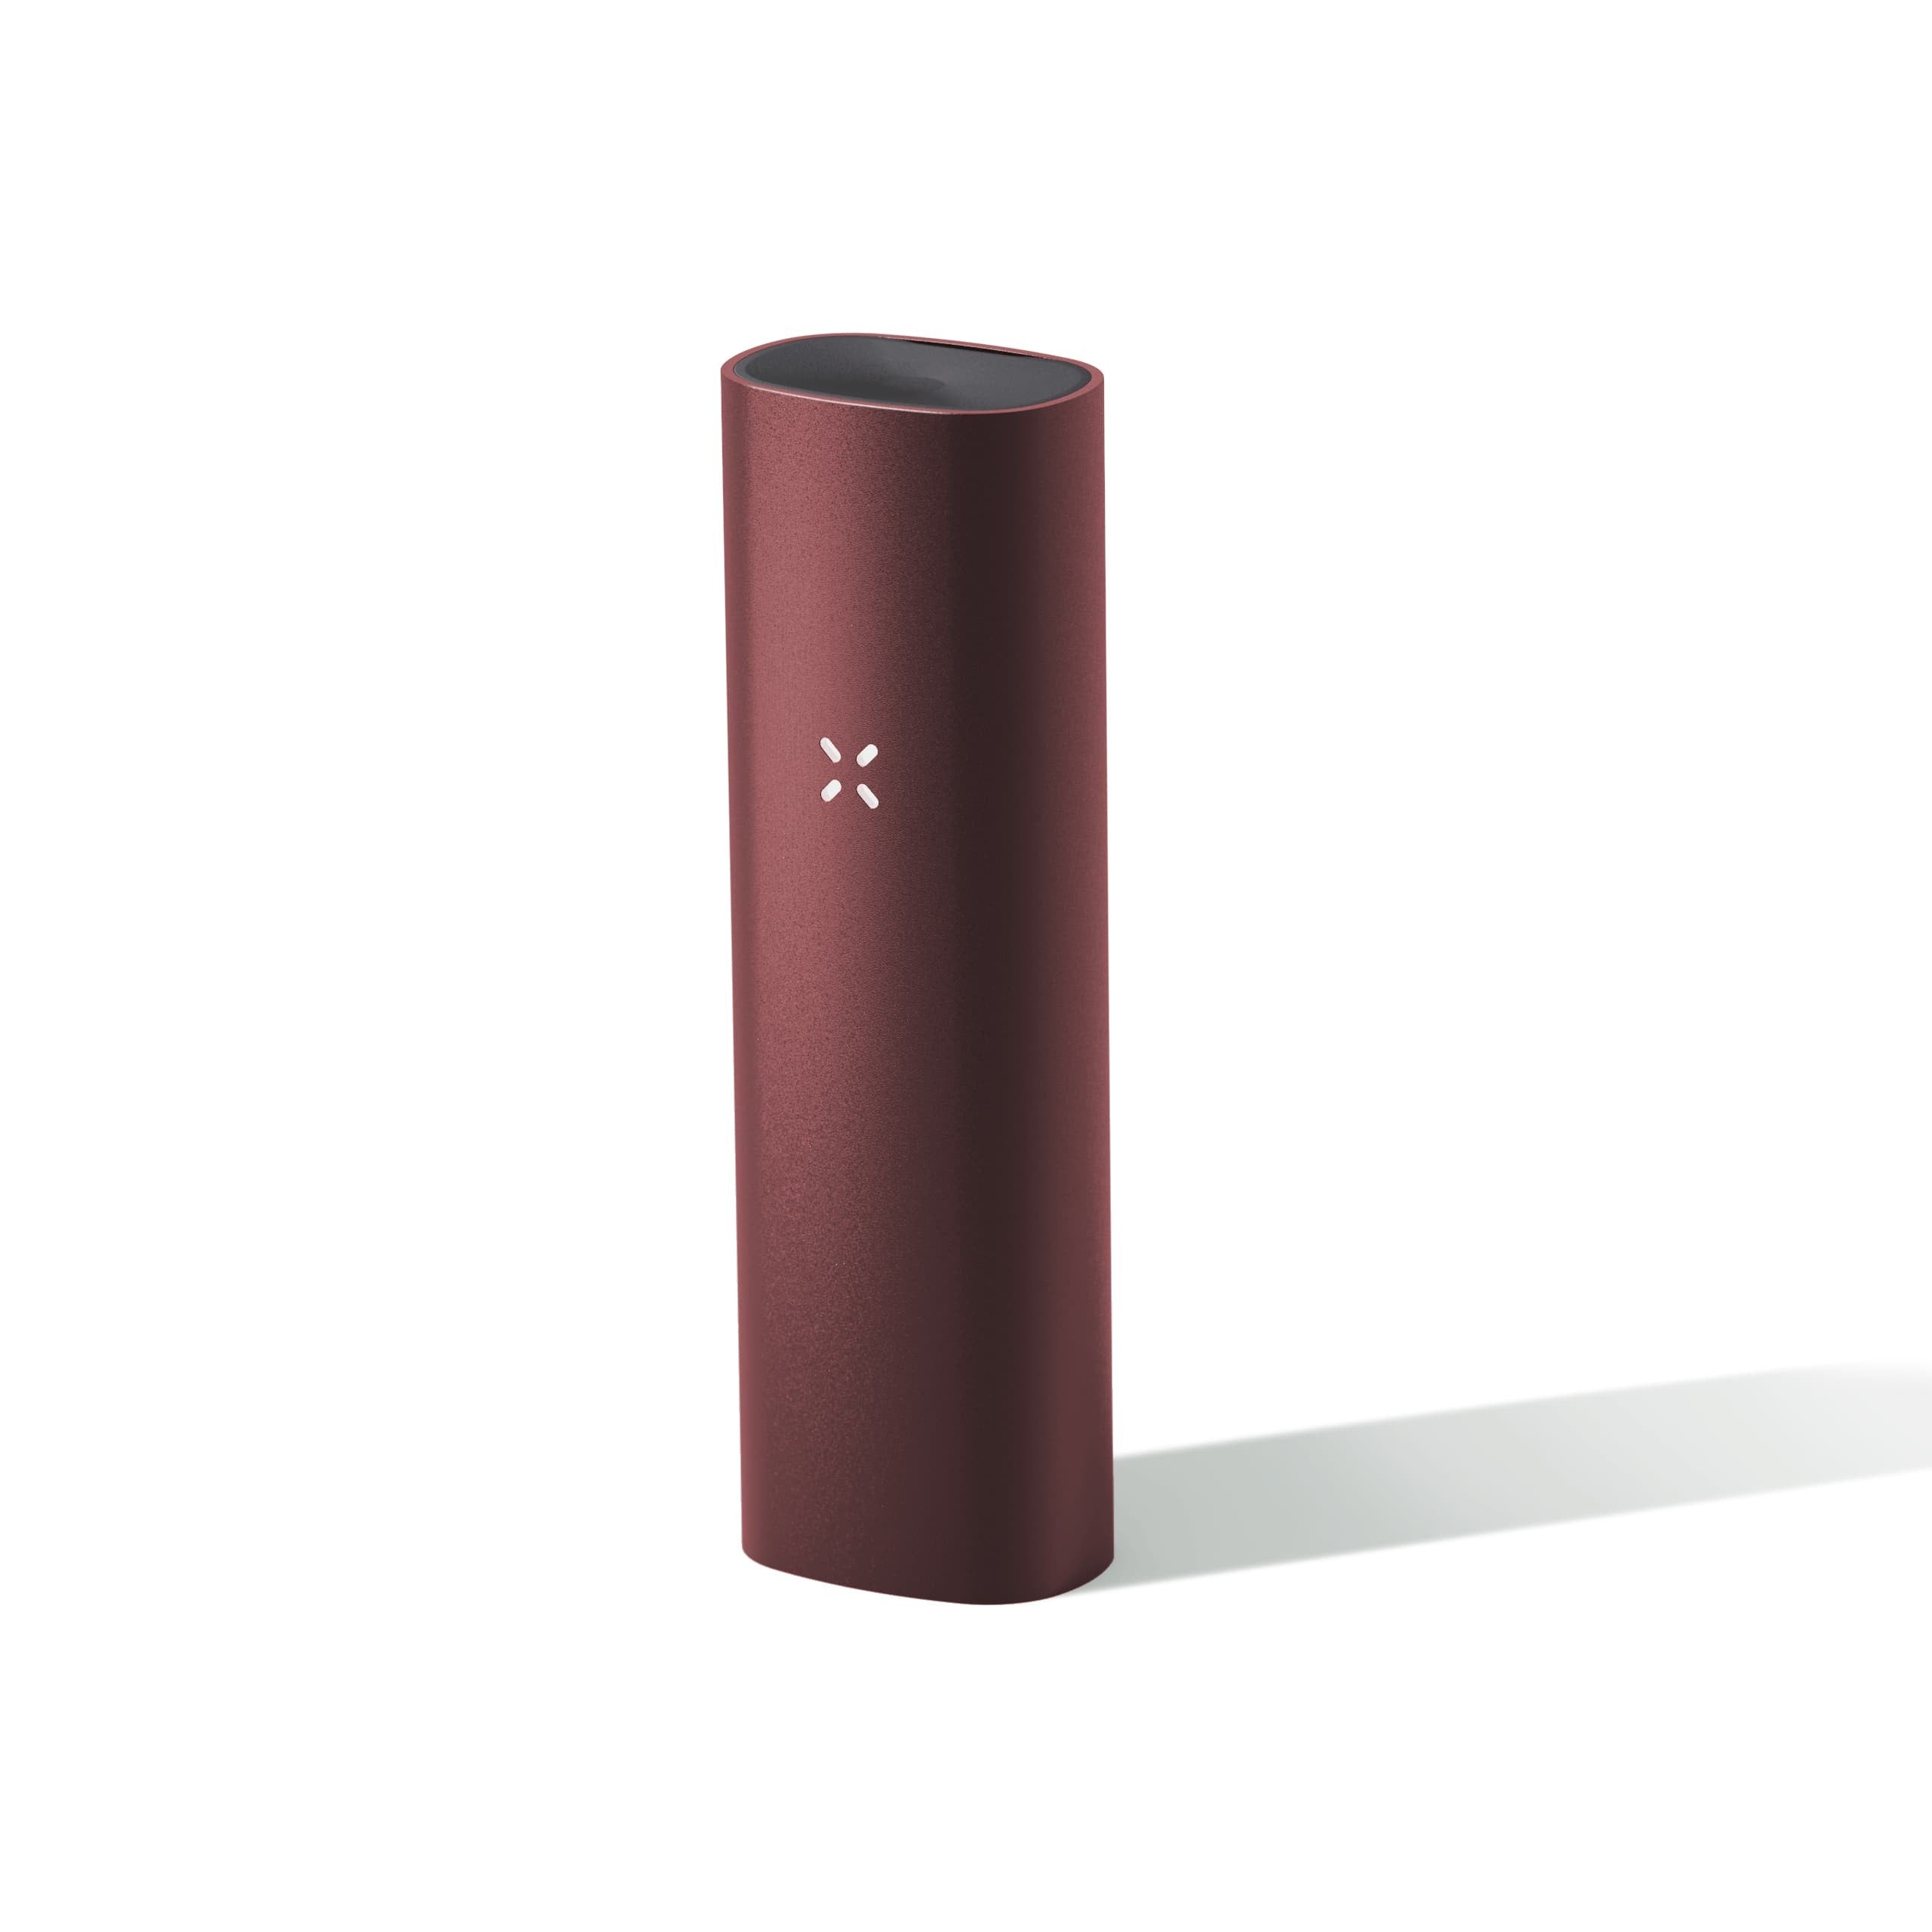 PAX 3 - Kit Completo